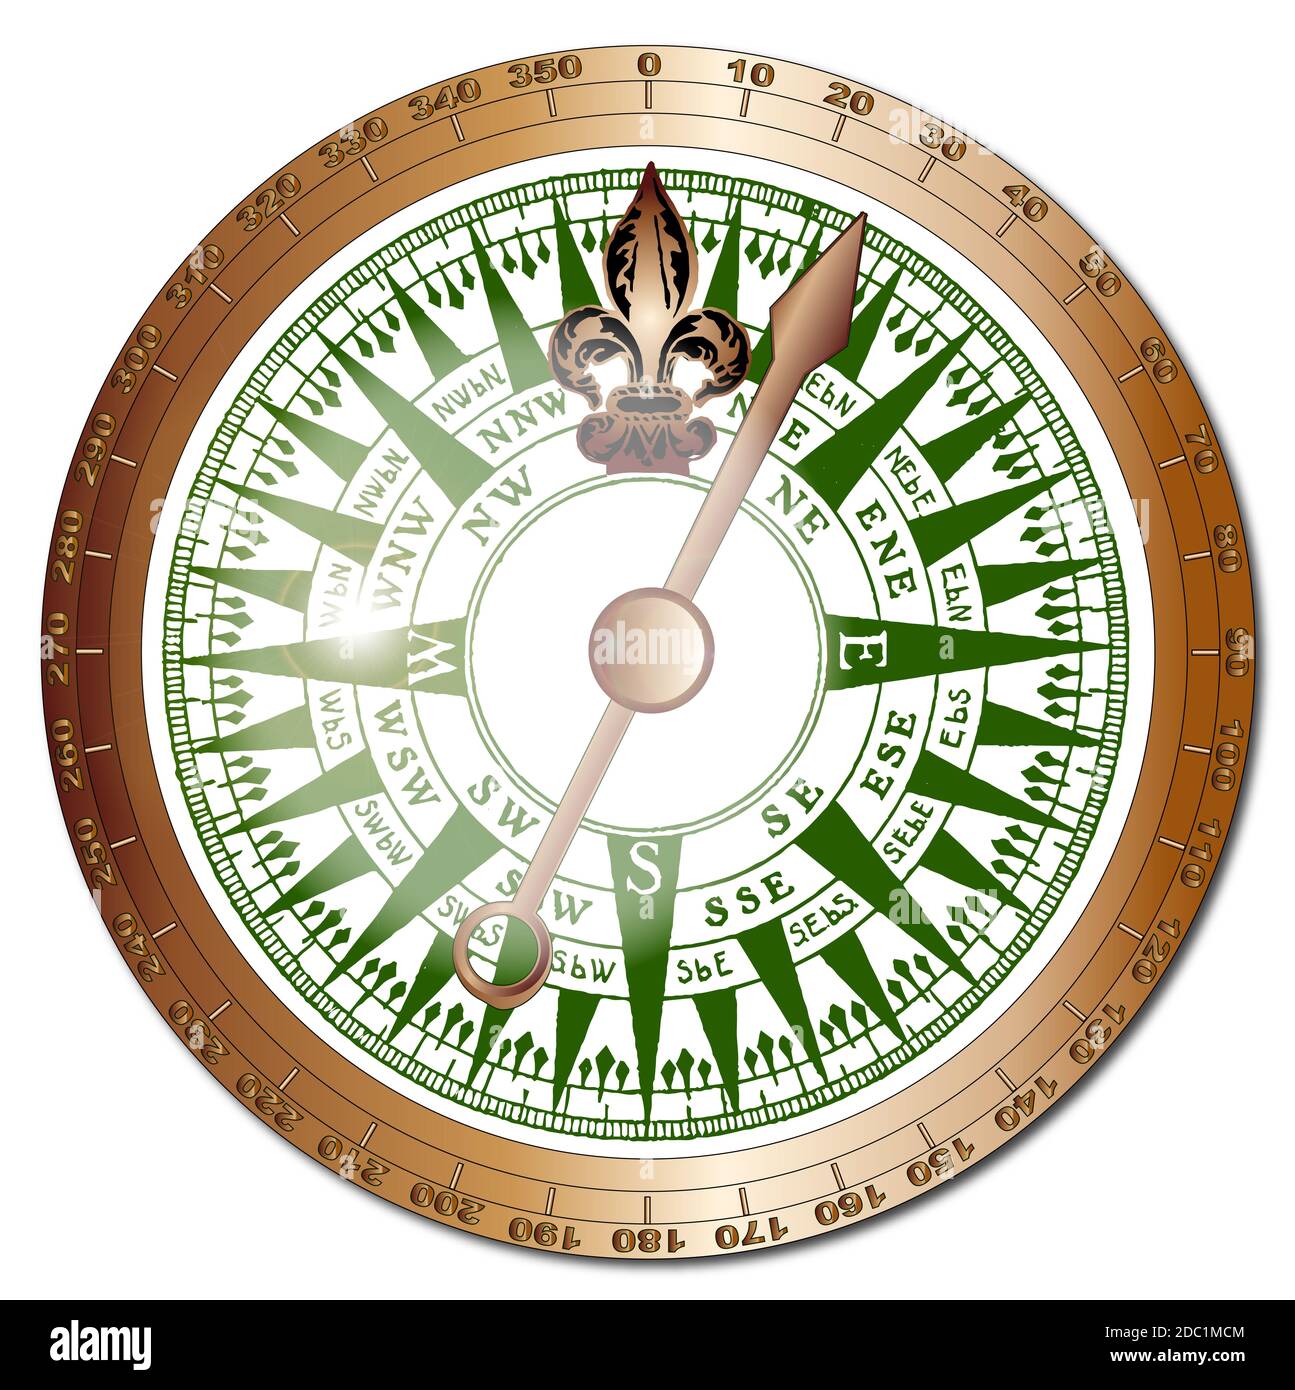 61,897 Ship Compass Images, Stock Photos, 3D objects, & Vectors